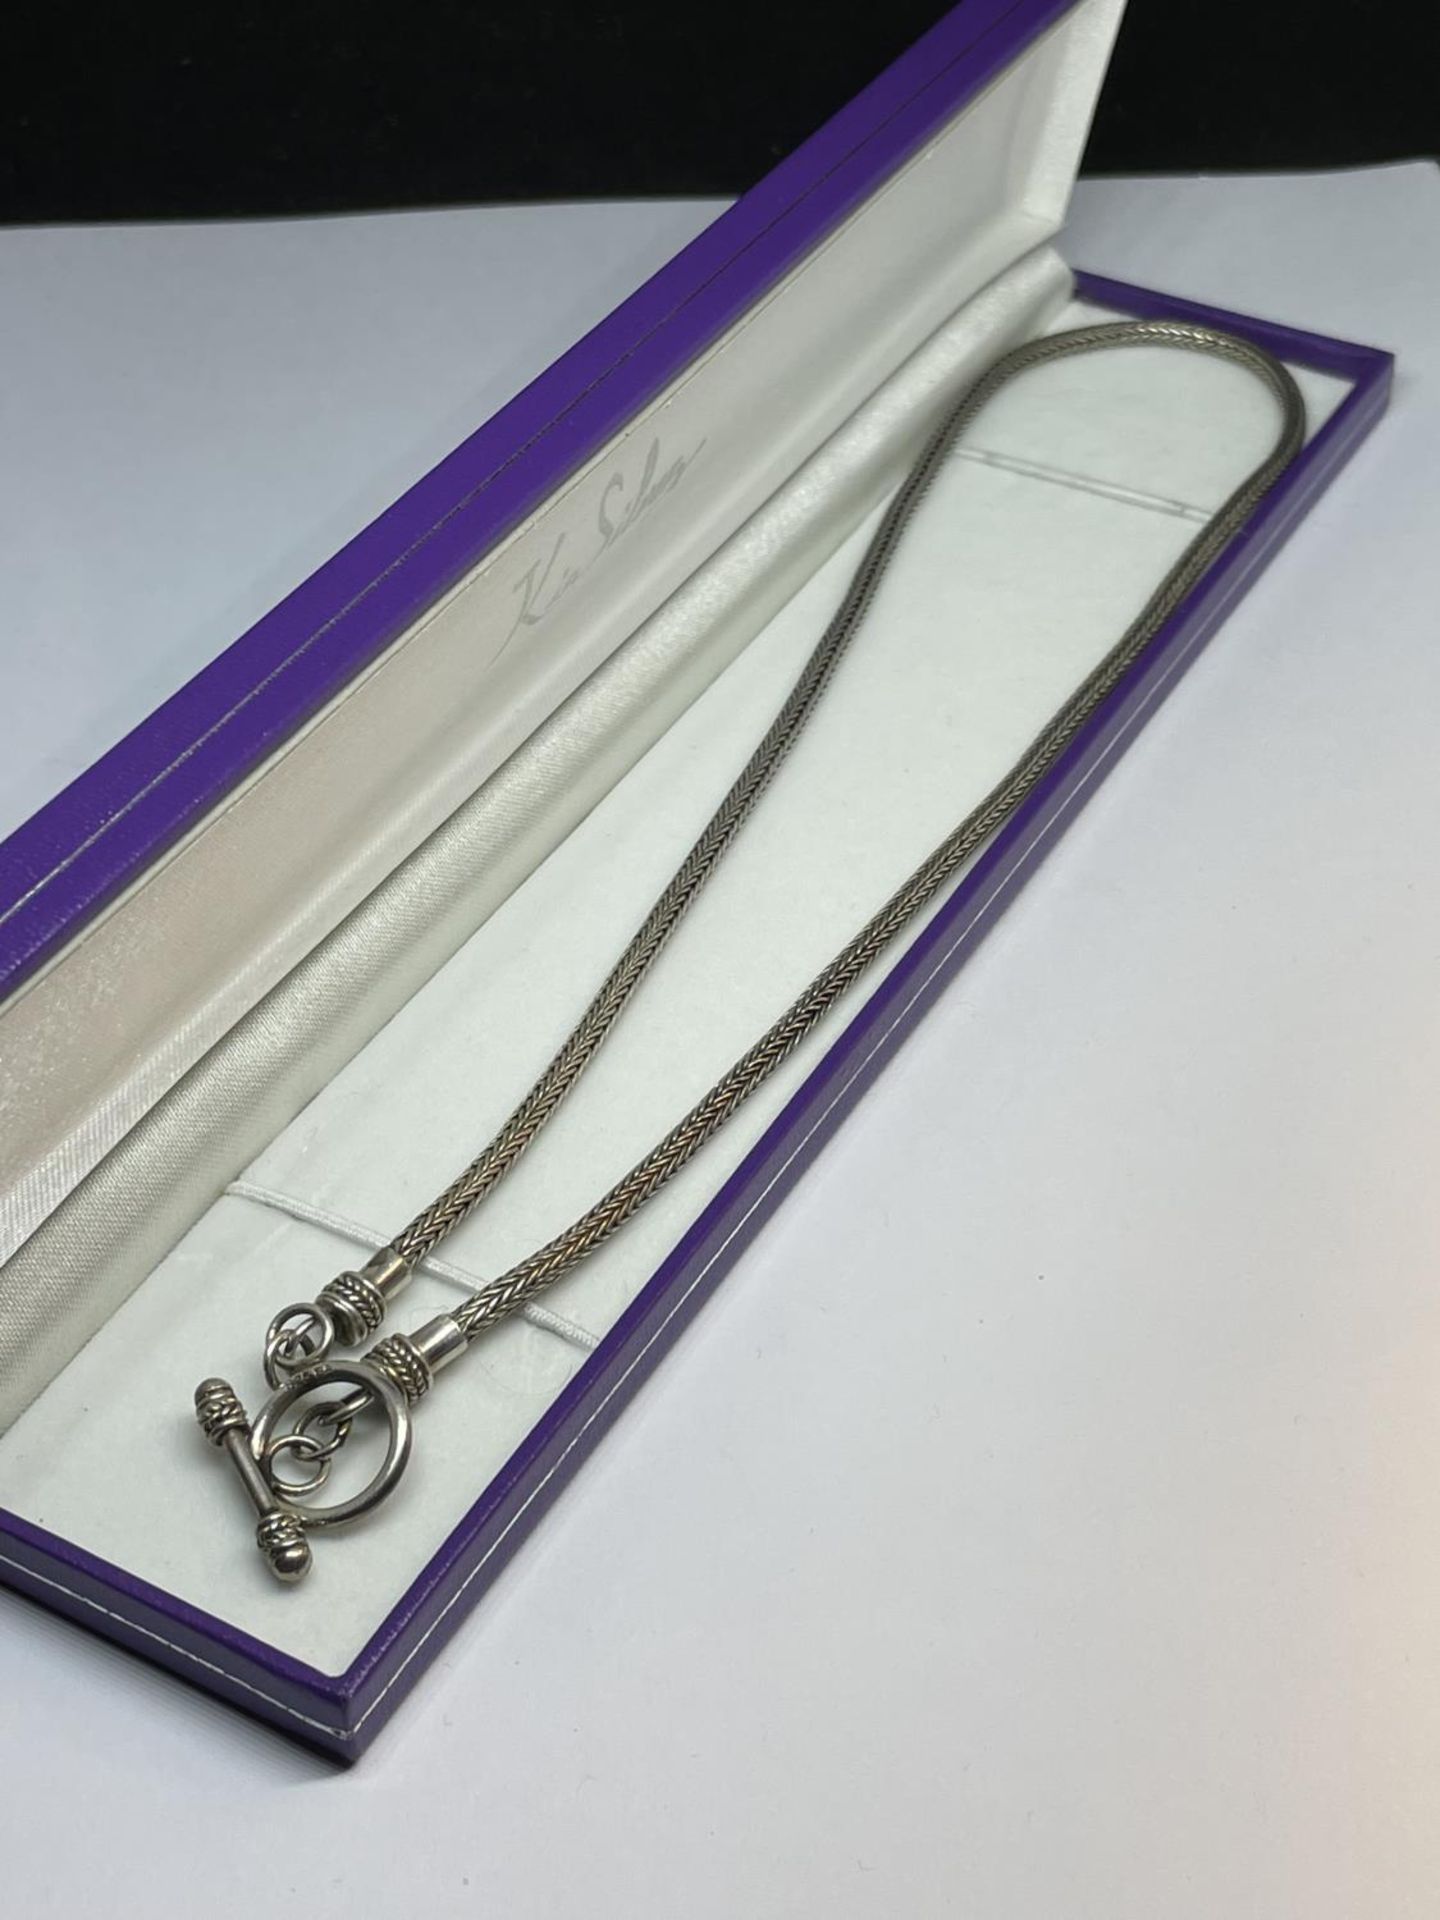 A MARKED SILVER T BAR NECKLACE IN A PRESENTATION BOX